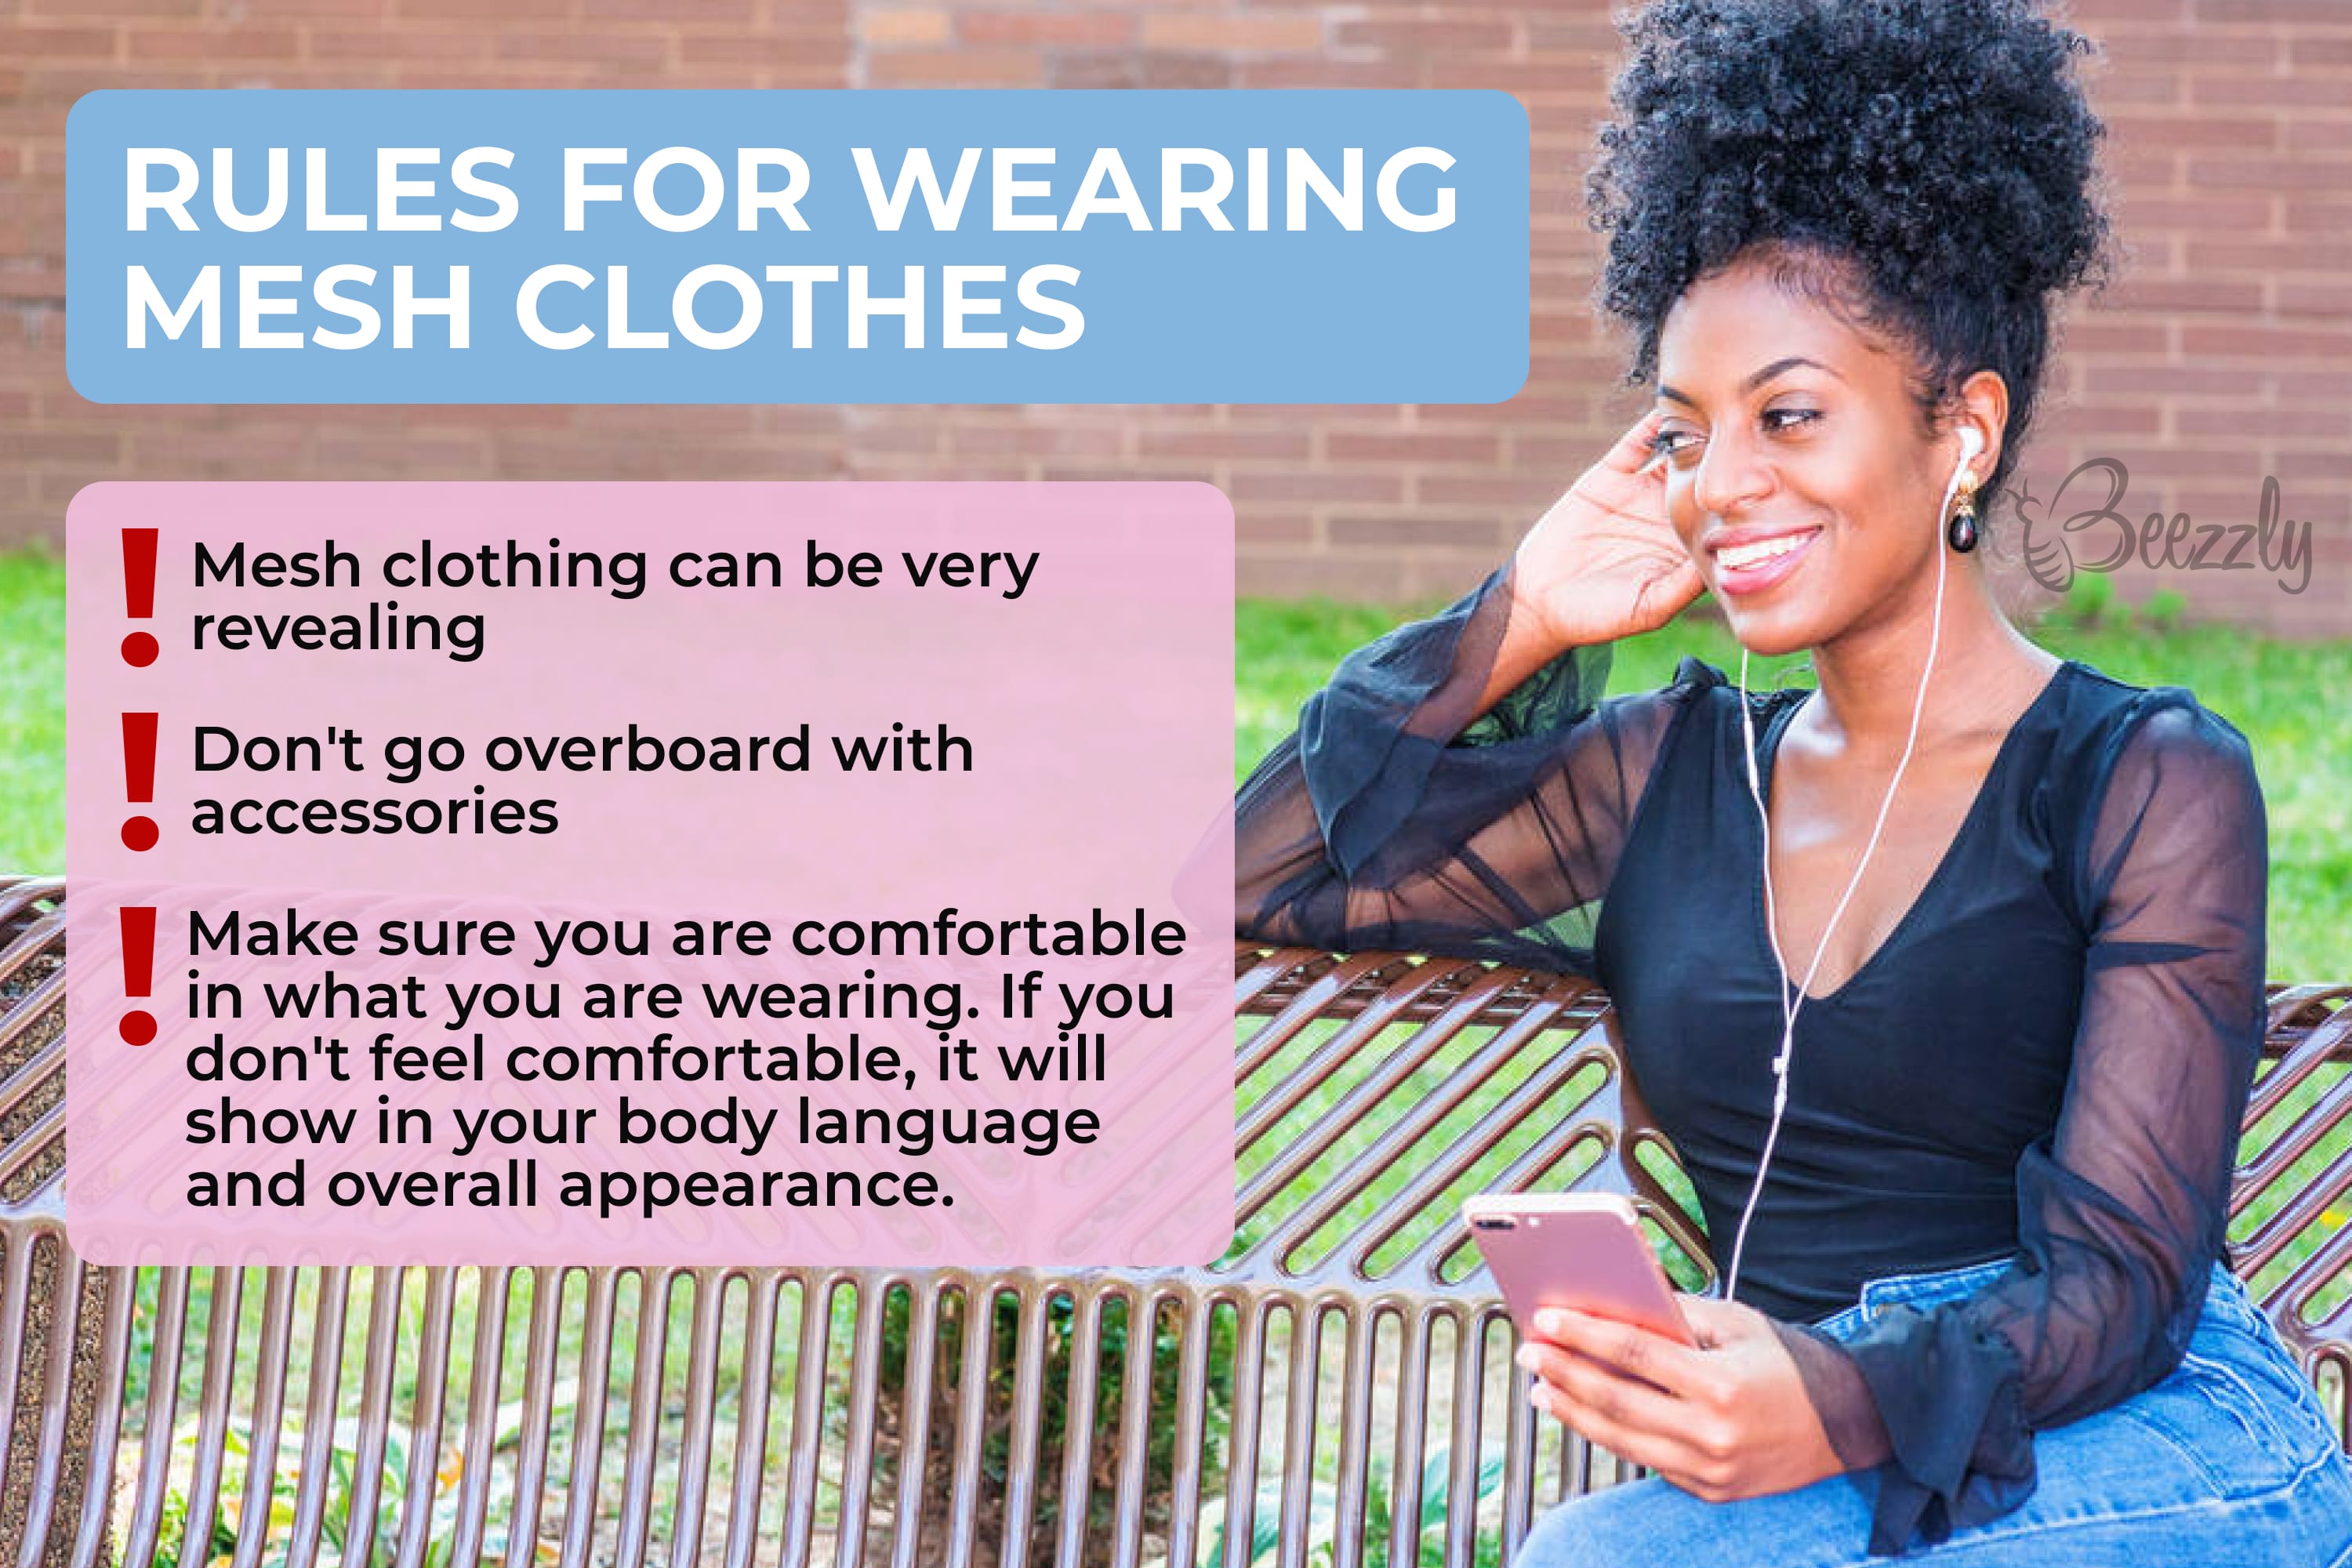 Rules for wearing mesh clothes